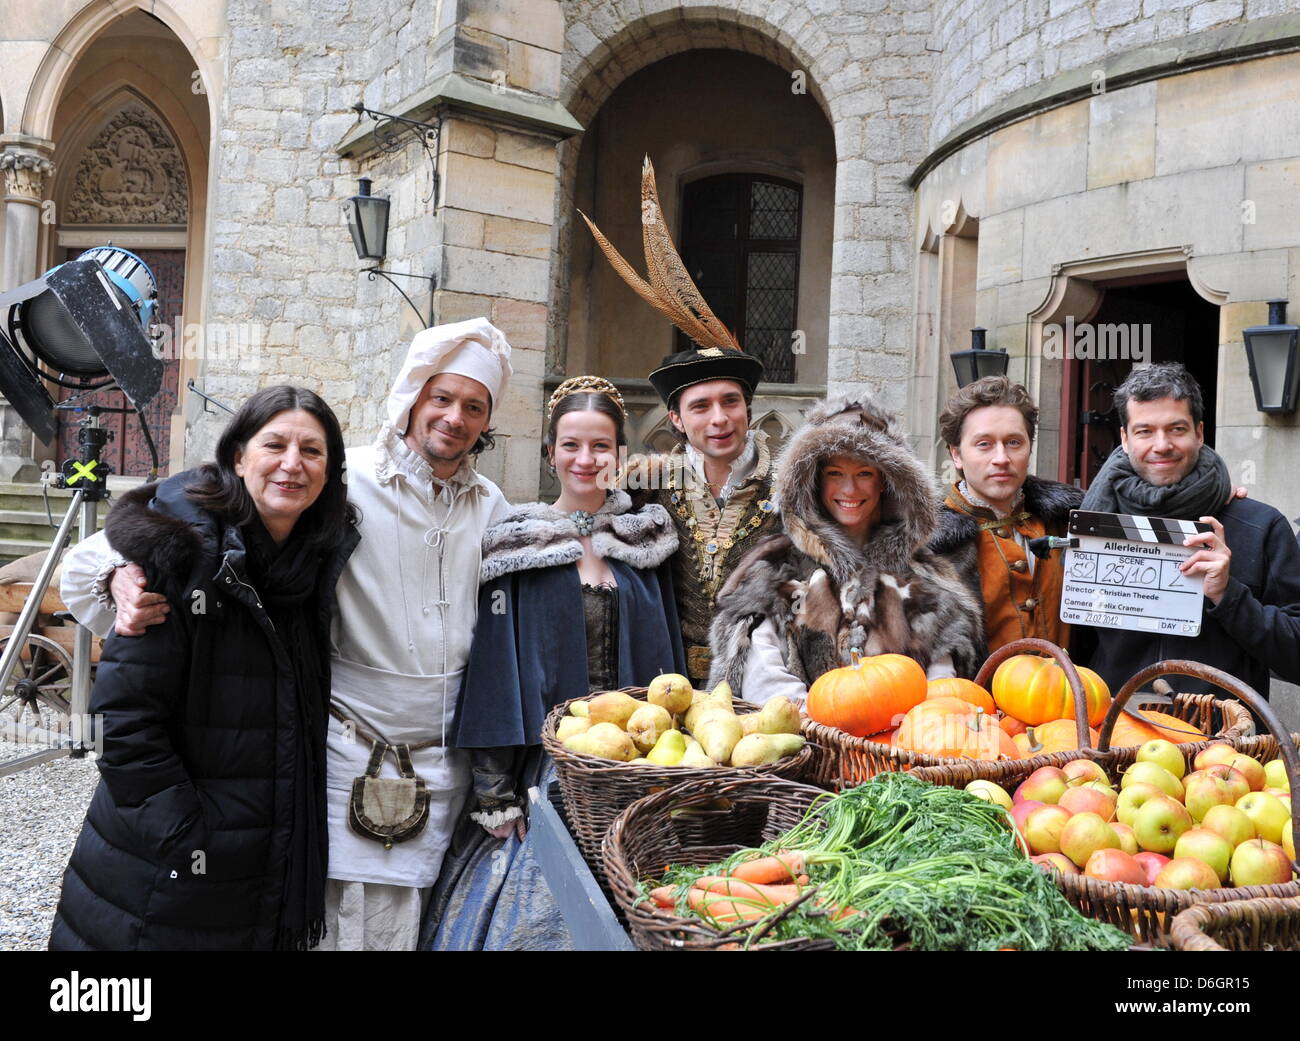 Producer Elke Ried, actors Fritz Karl, Nina Gummich, André Kaczmarczyk, Henriette Confurius, Adrian Topol and director Christian Theede pose on the set of the fairy tale 'Allerleirauh' ('All-Kinds-of-Fur') by the Brothers Grimm at Marienburg Castle near Schulenberg, Germany, 22 February 2012. With the movie, the German Broadcaster ARD is starting the fifth season of its successful  Stock Photo